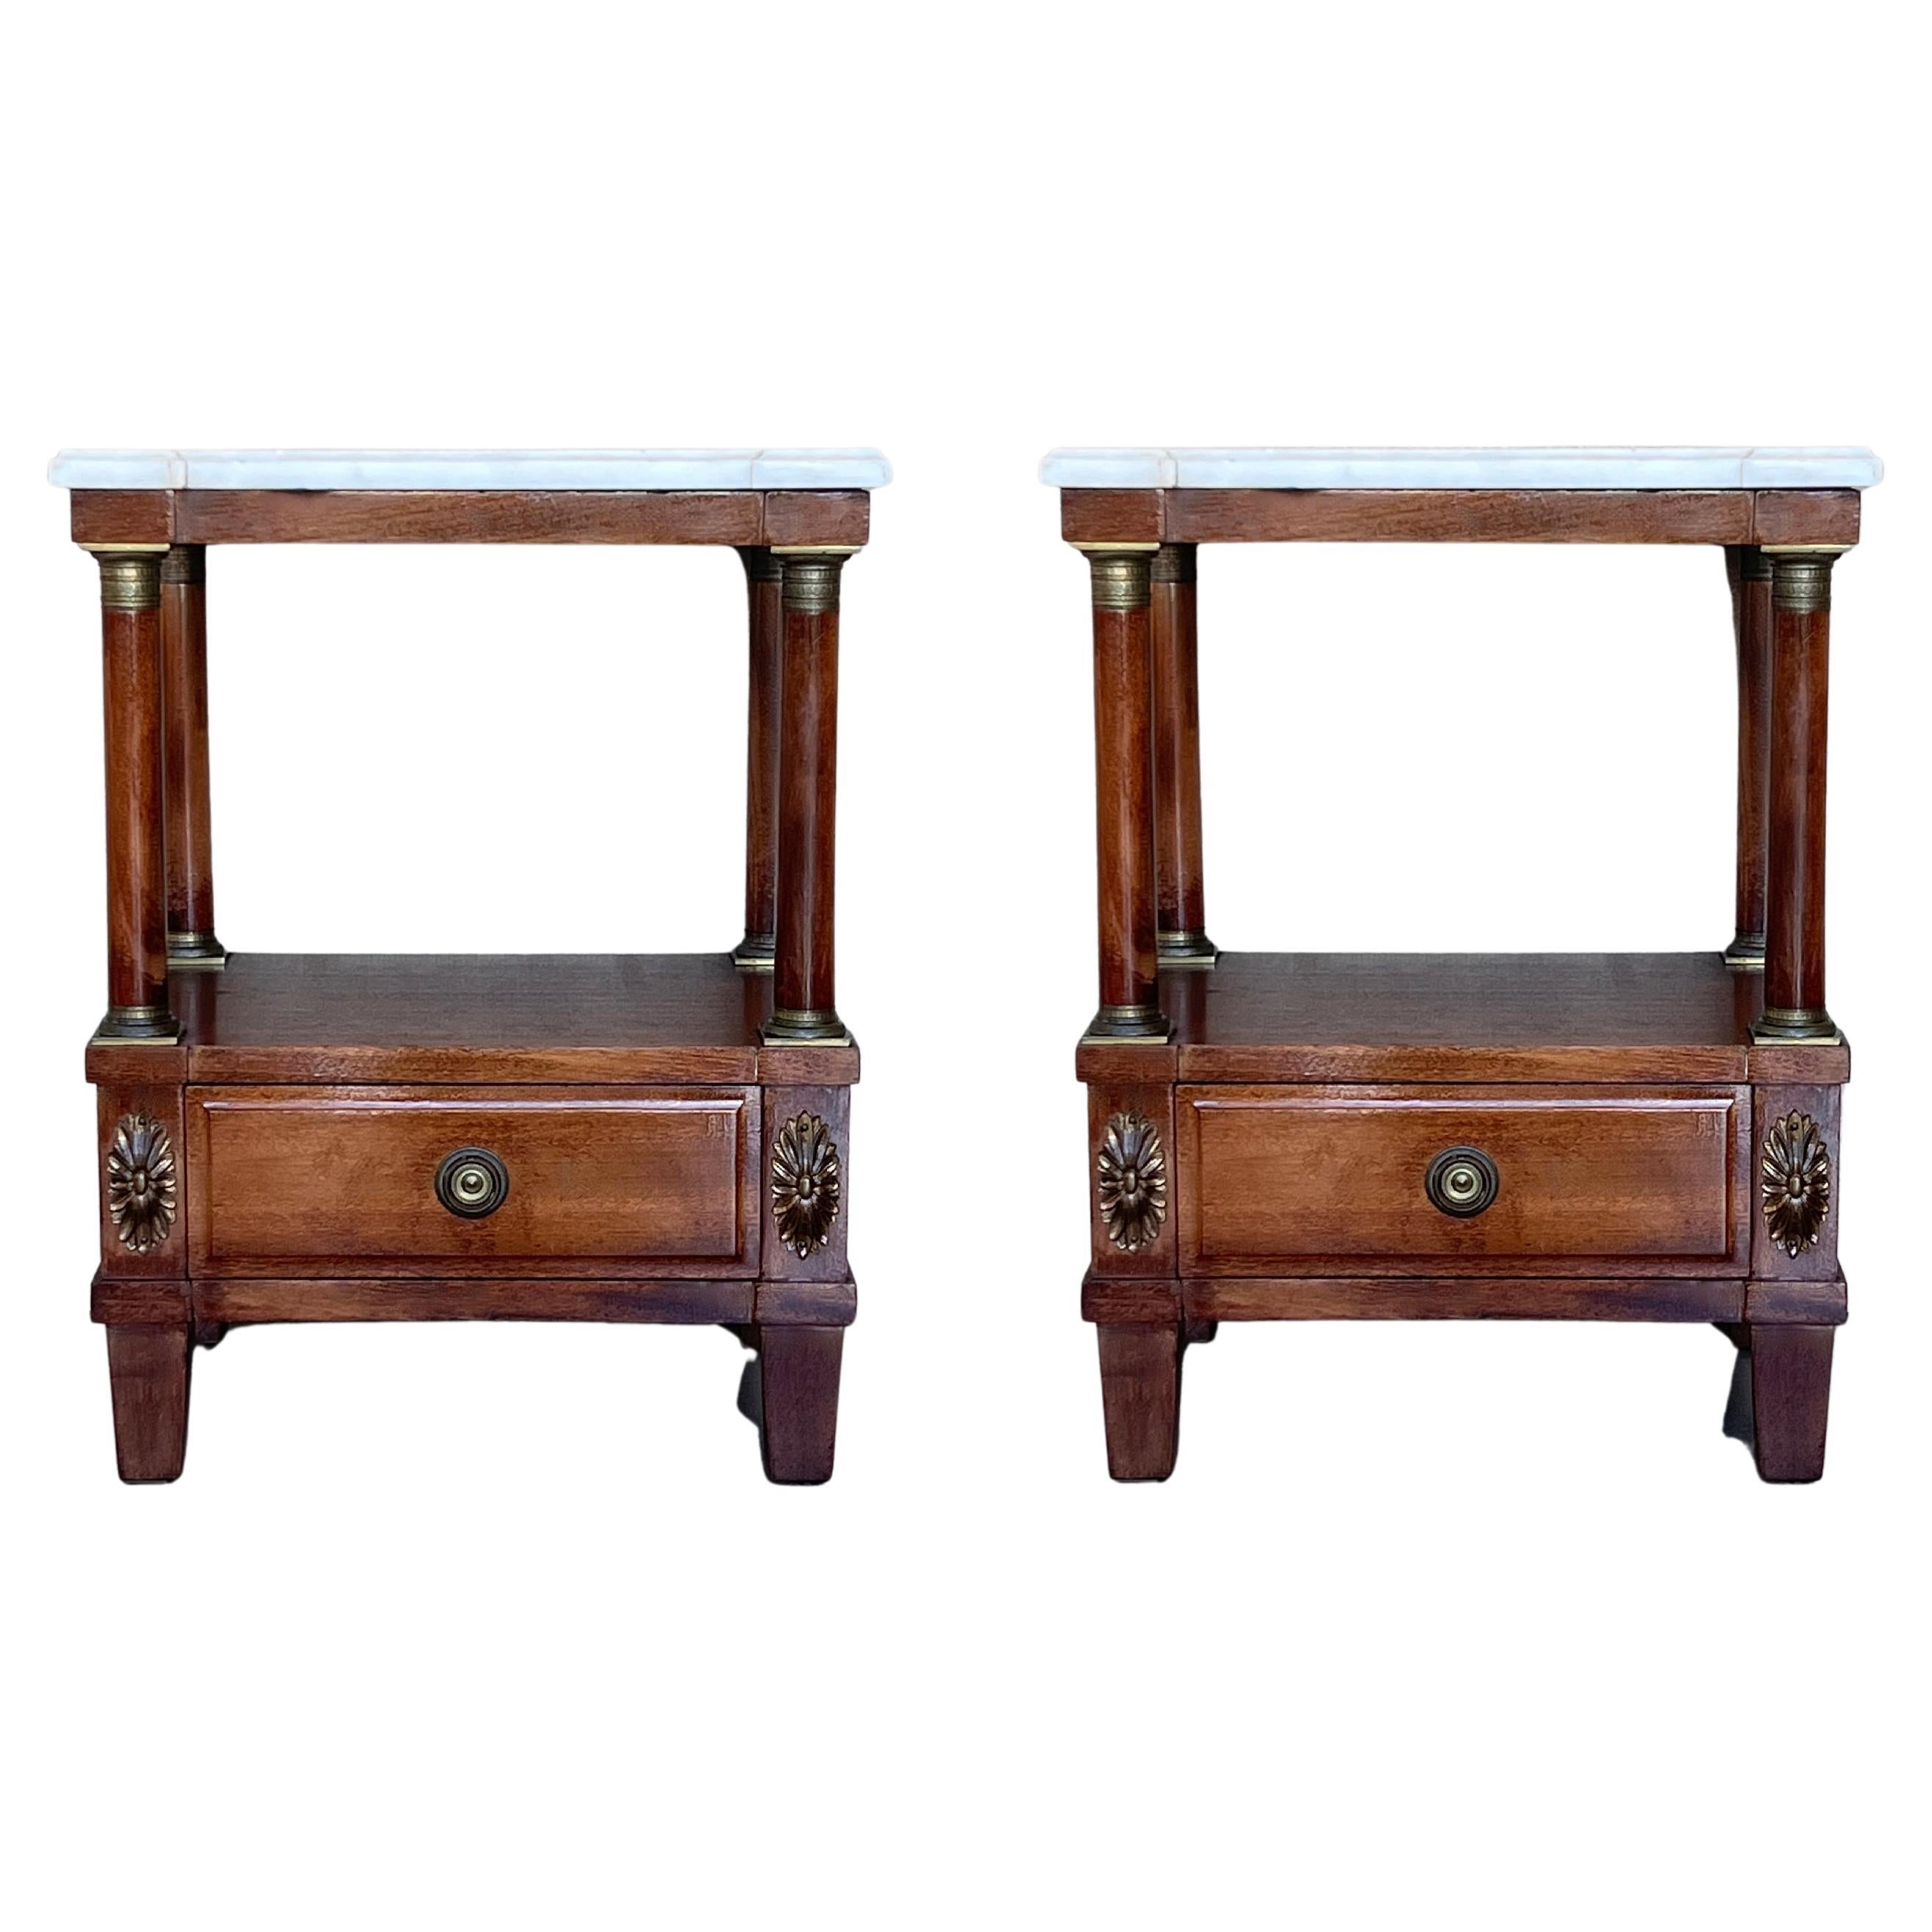 Pair of Empire Style Marble-Top Nightstands with shelve and low drawer For Sale